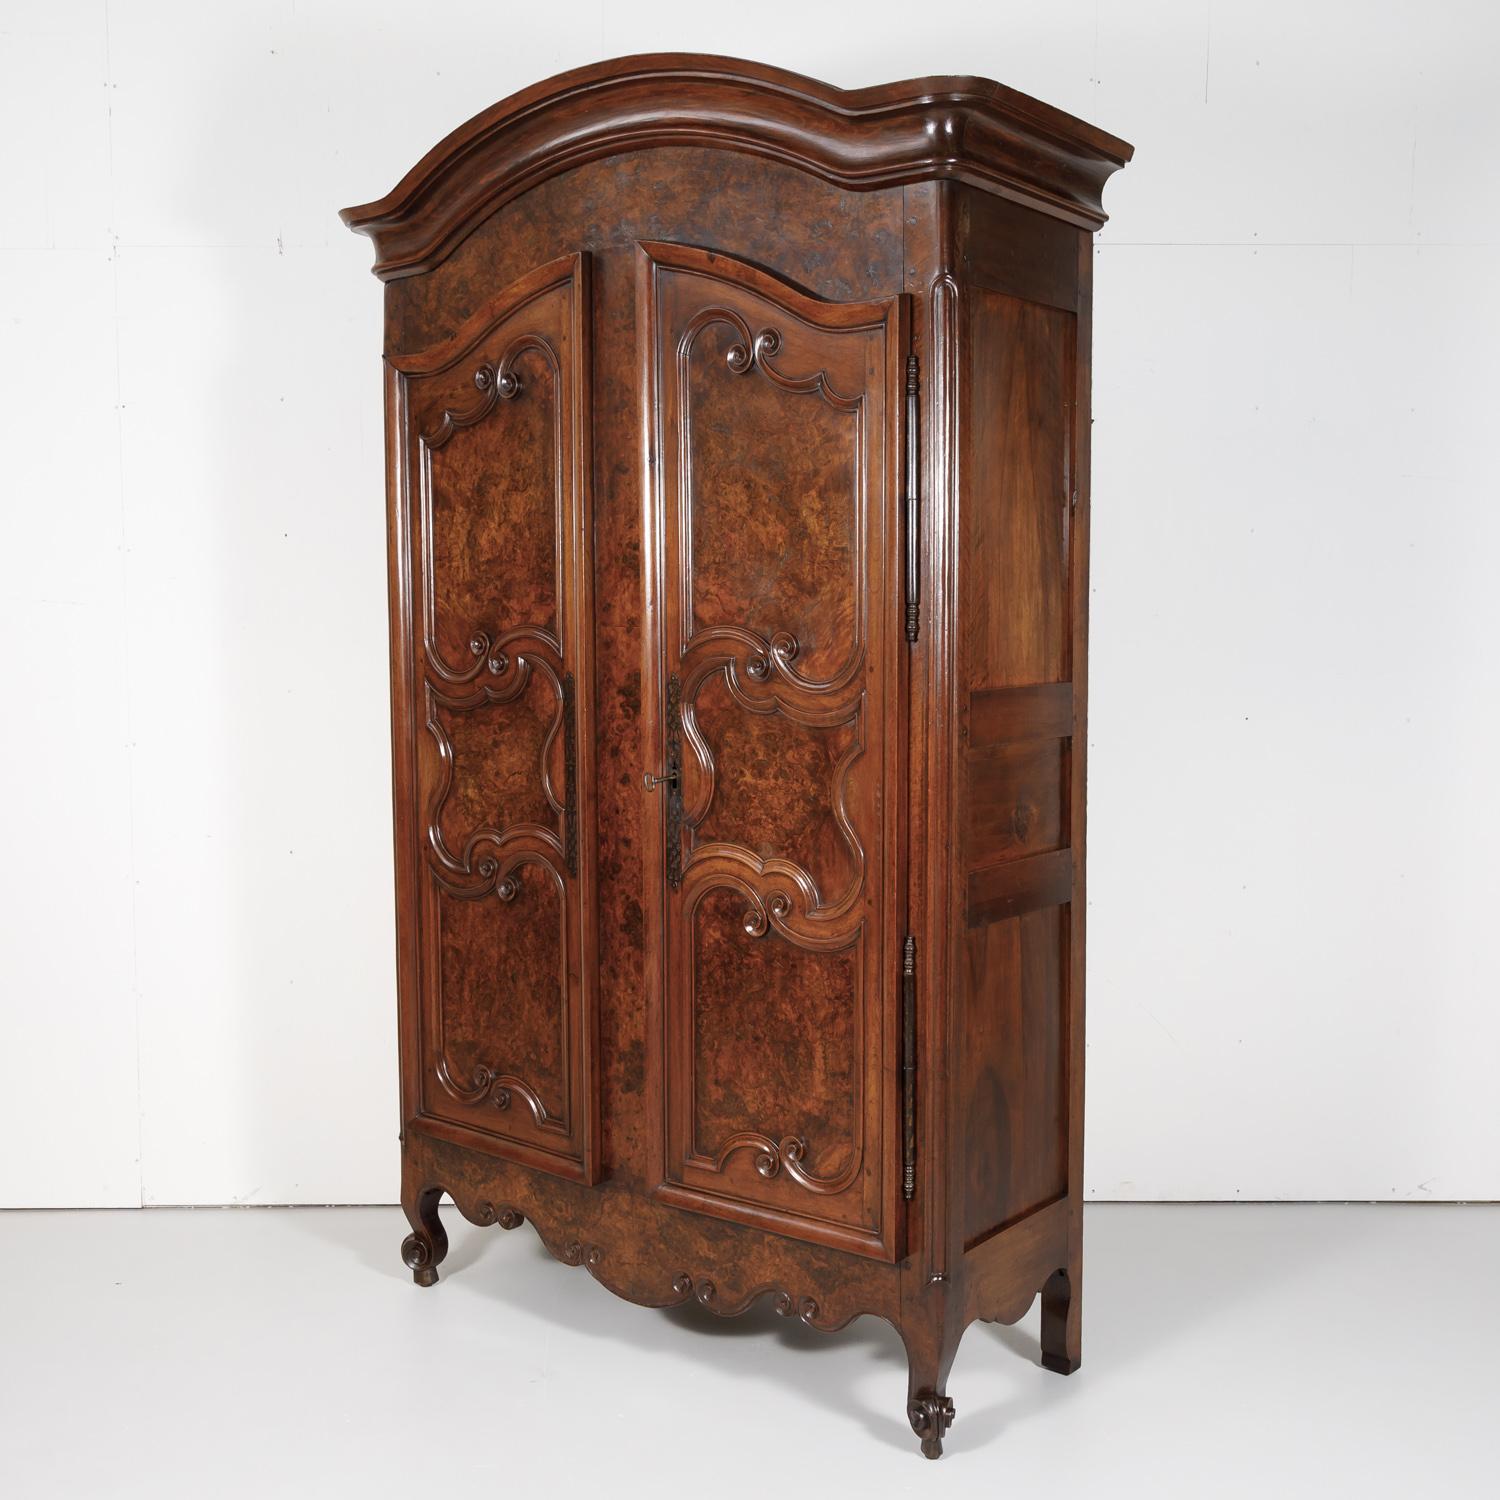 An exceptional 18th century French period Louis XV armoire handcrafted of indigenous old growth walnut and burled walnut in the typical technique mastered by the skilled artisans of the Bresse region of France, circa 1750s. This large provincial